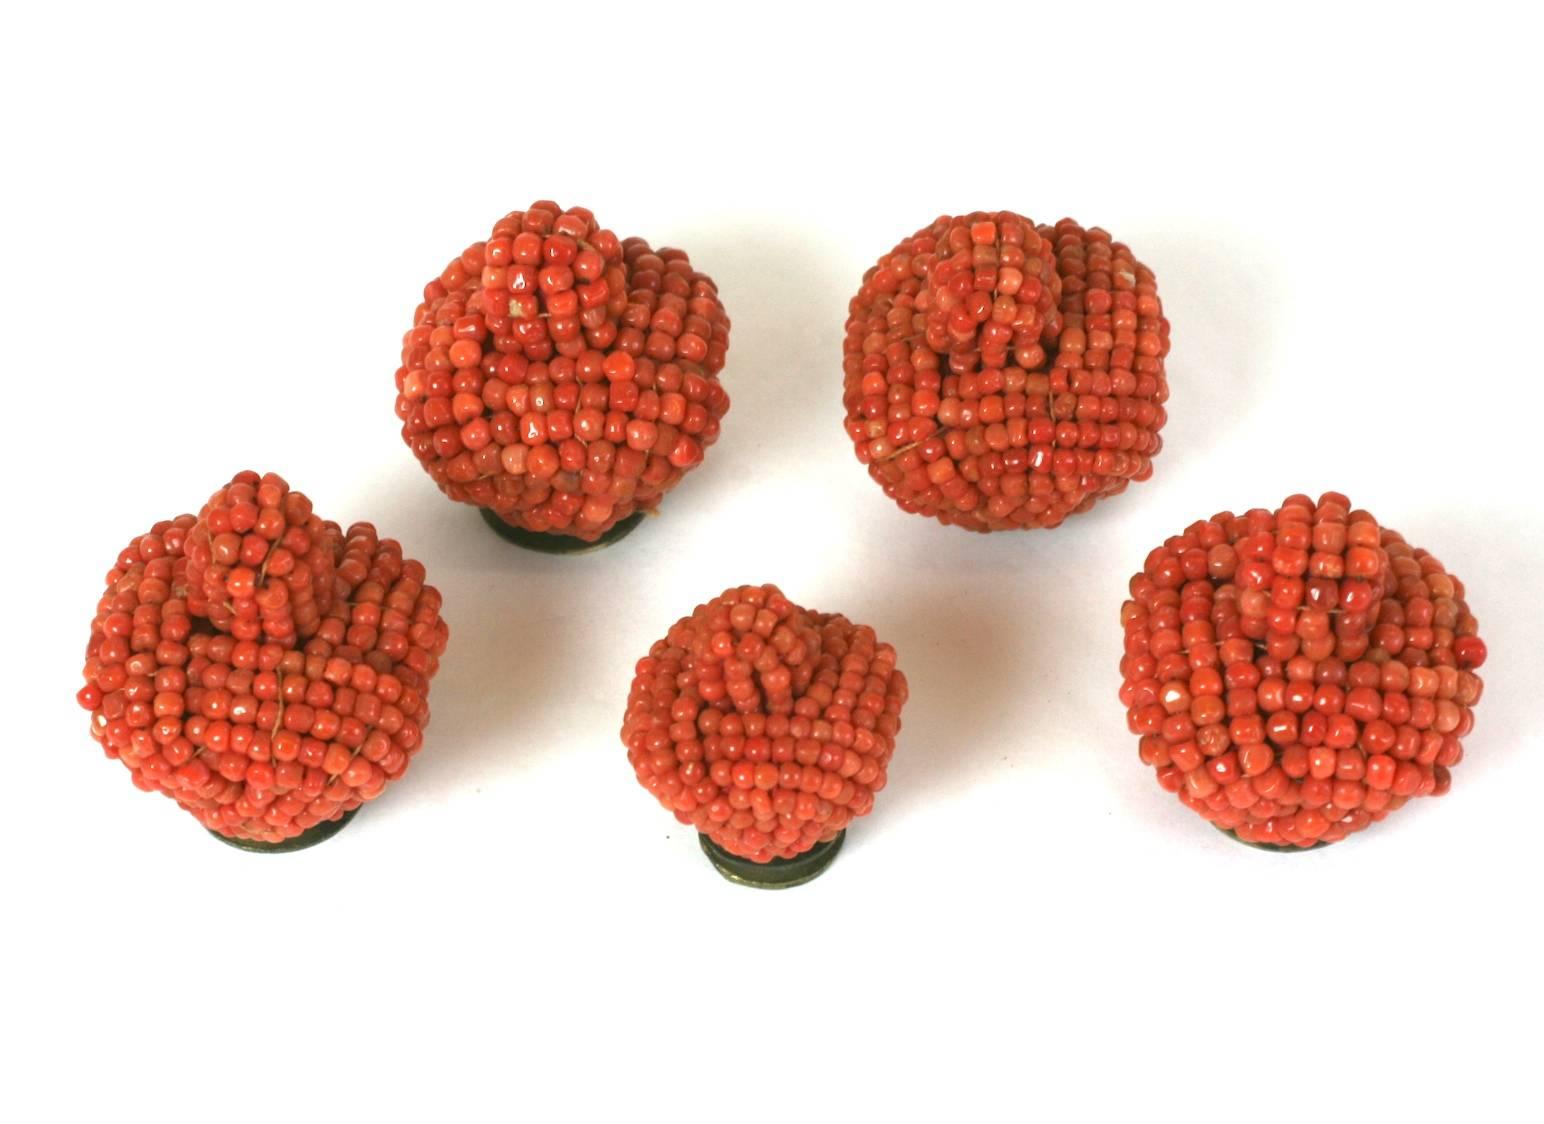 Set of Lovely Antique Chinese Coral Hat Finials from the 19th Century. Beautifully hand beaded and formed into a top knot for use as a hat finial. Fittings screw off base for attaching to fabric. 4 large and 1 small knot. 
Labeled 